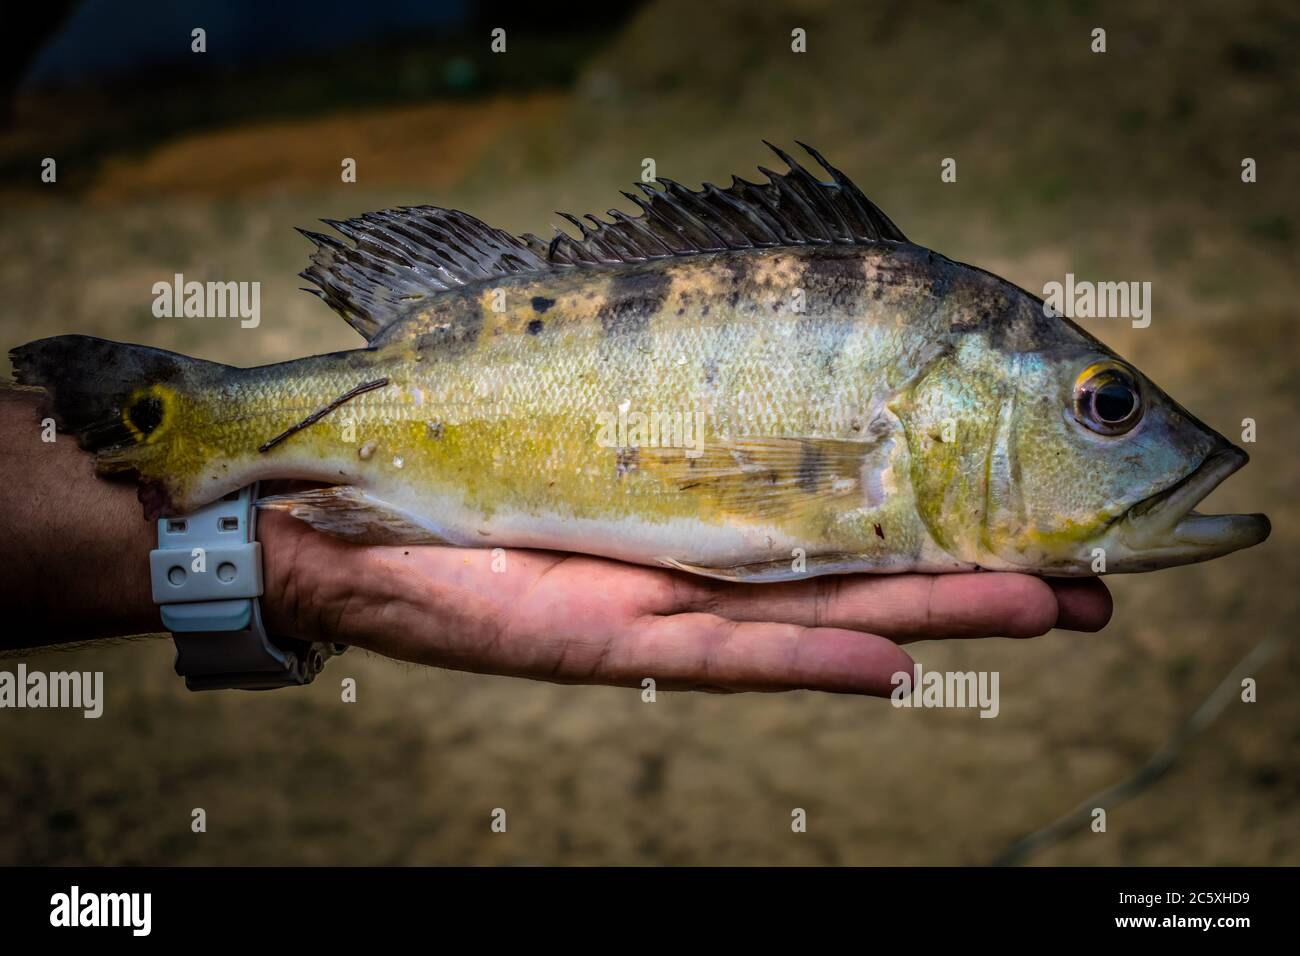 Cichla sp. a perciform with a high area range in South America. It´s caudal fin was bitten by a piranha. Stock Photo